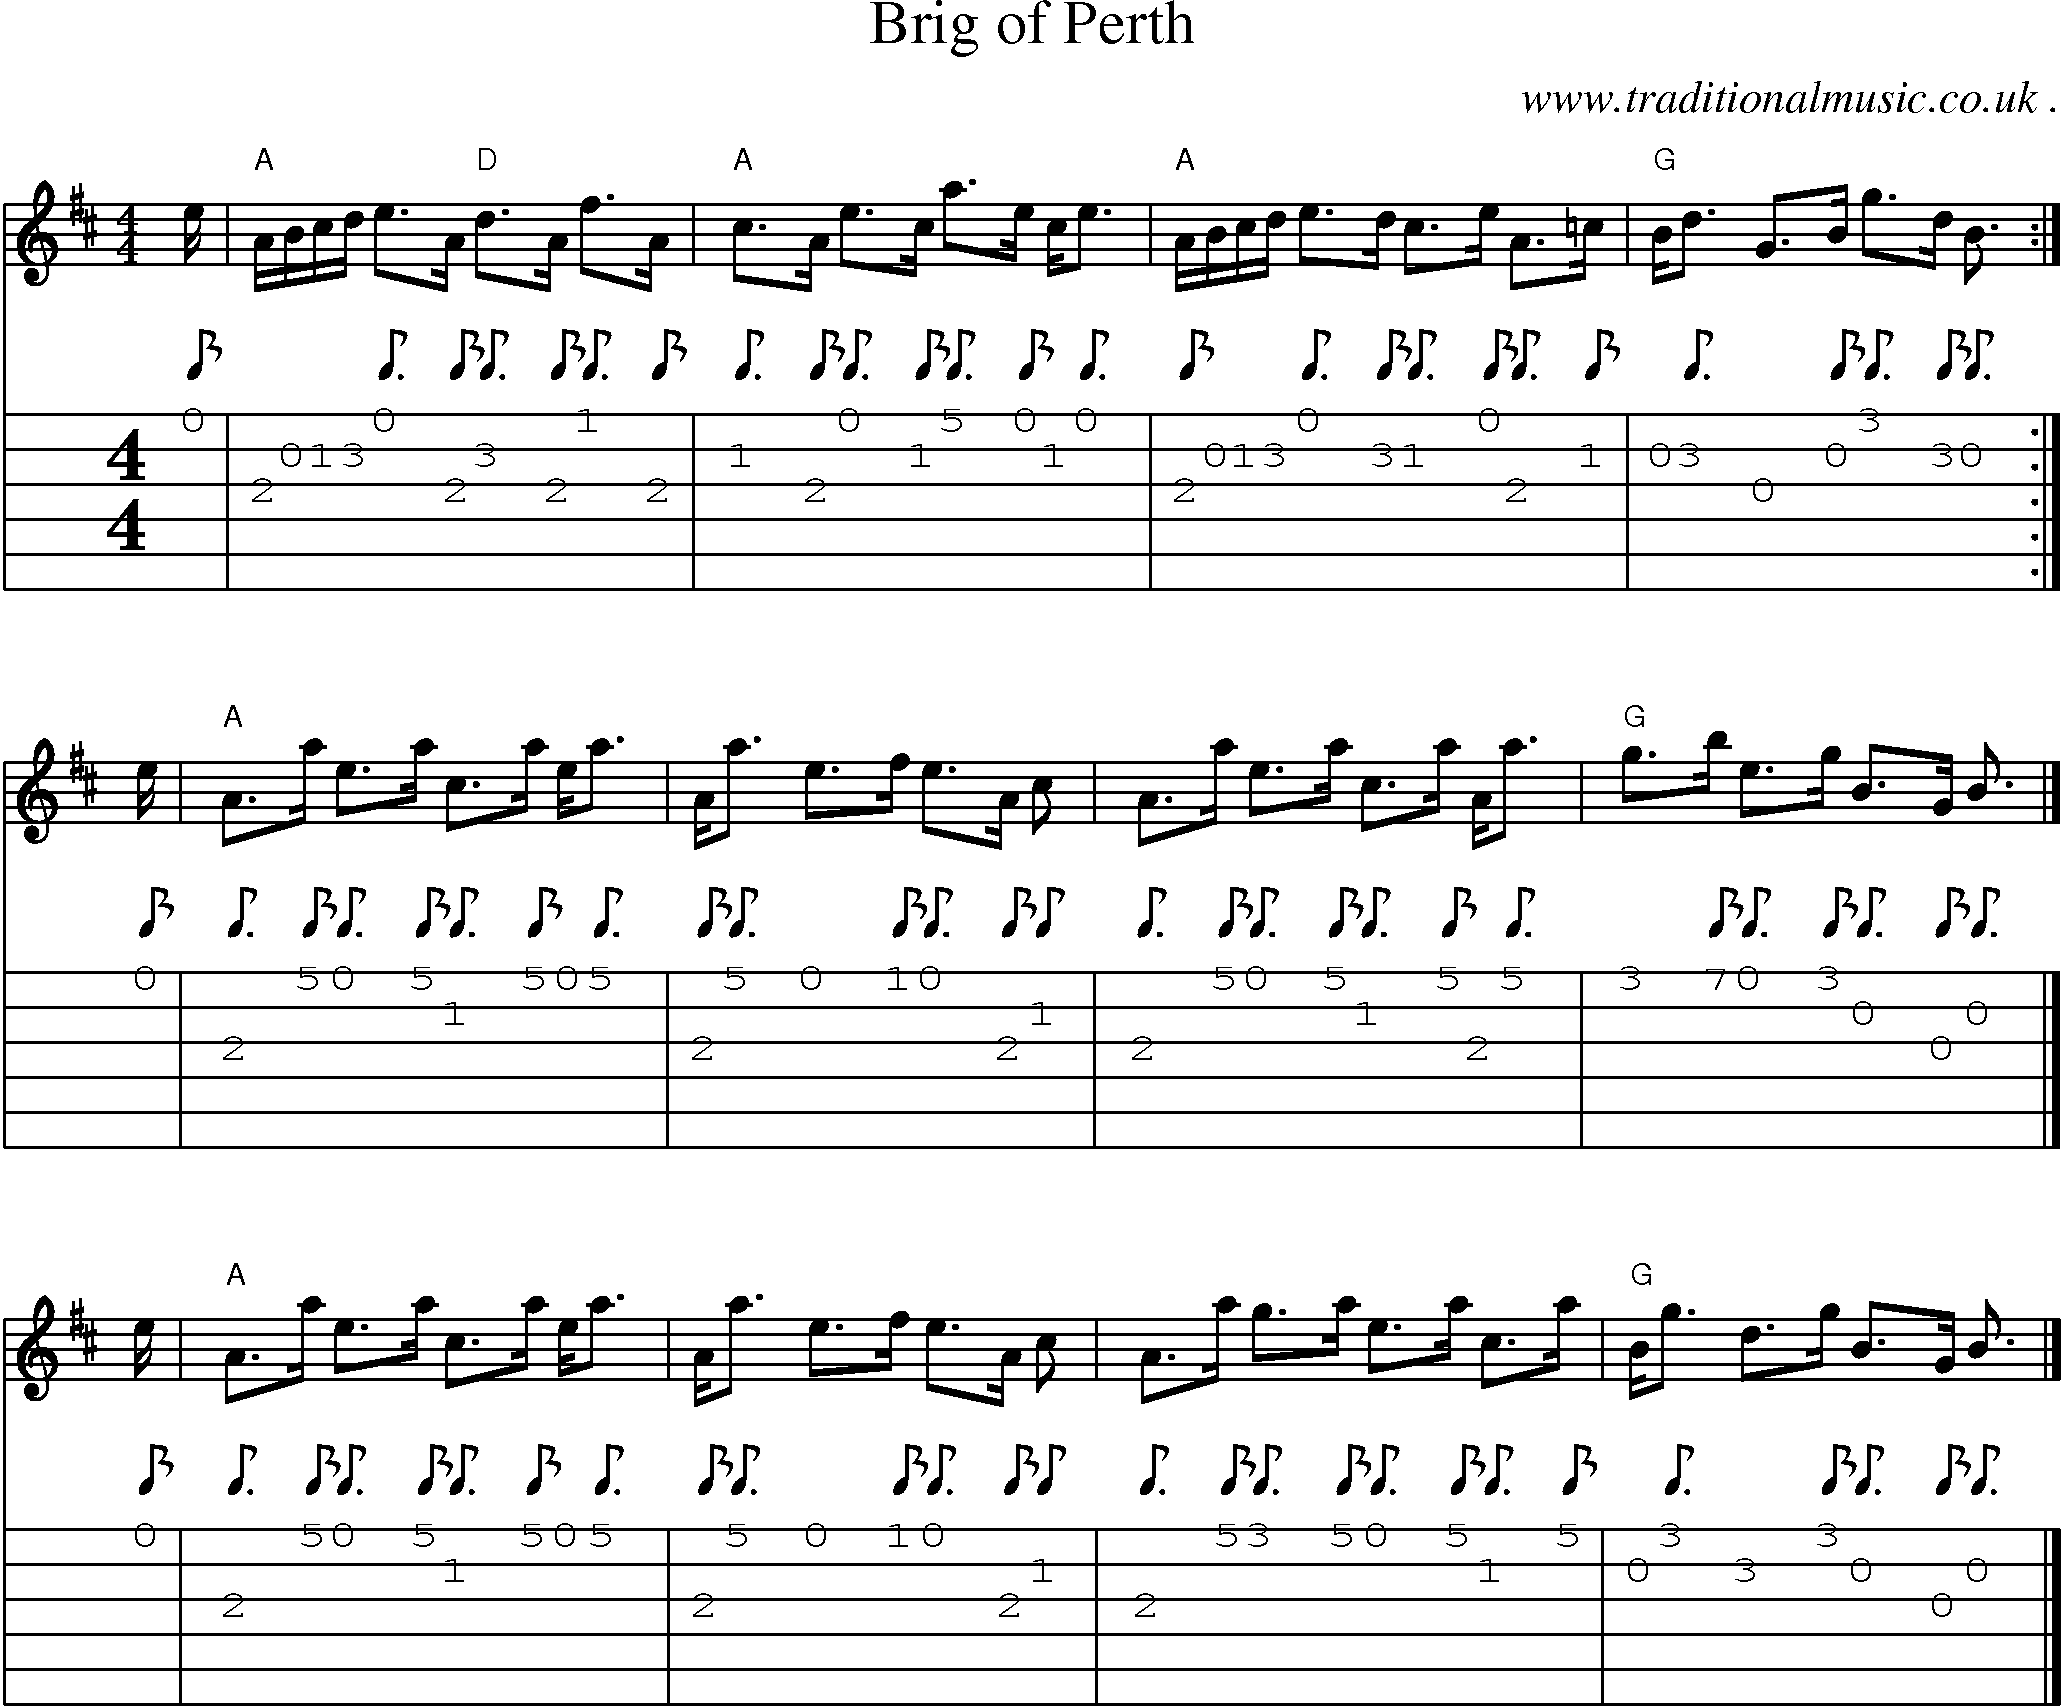 Sheet-music  score, Chords and Guitar Tabs for Brig Of Perth